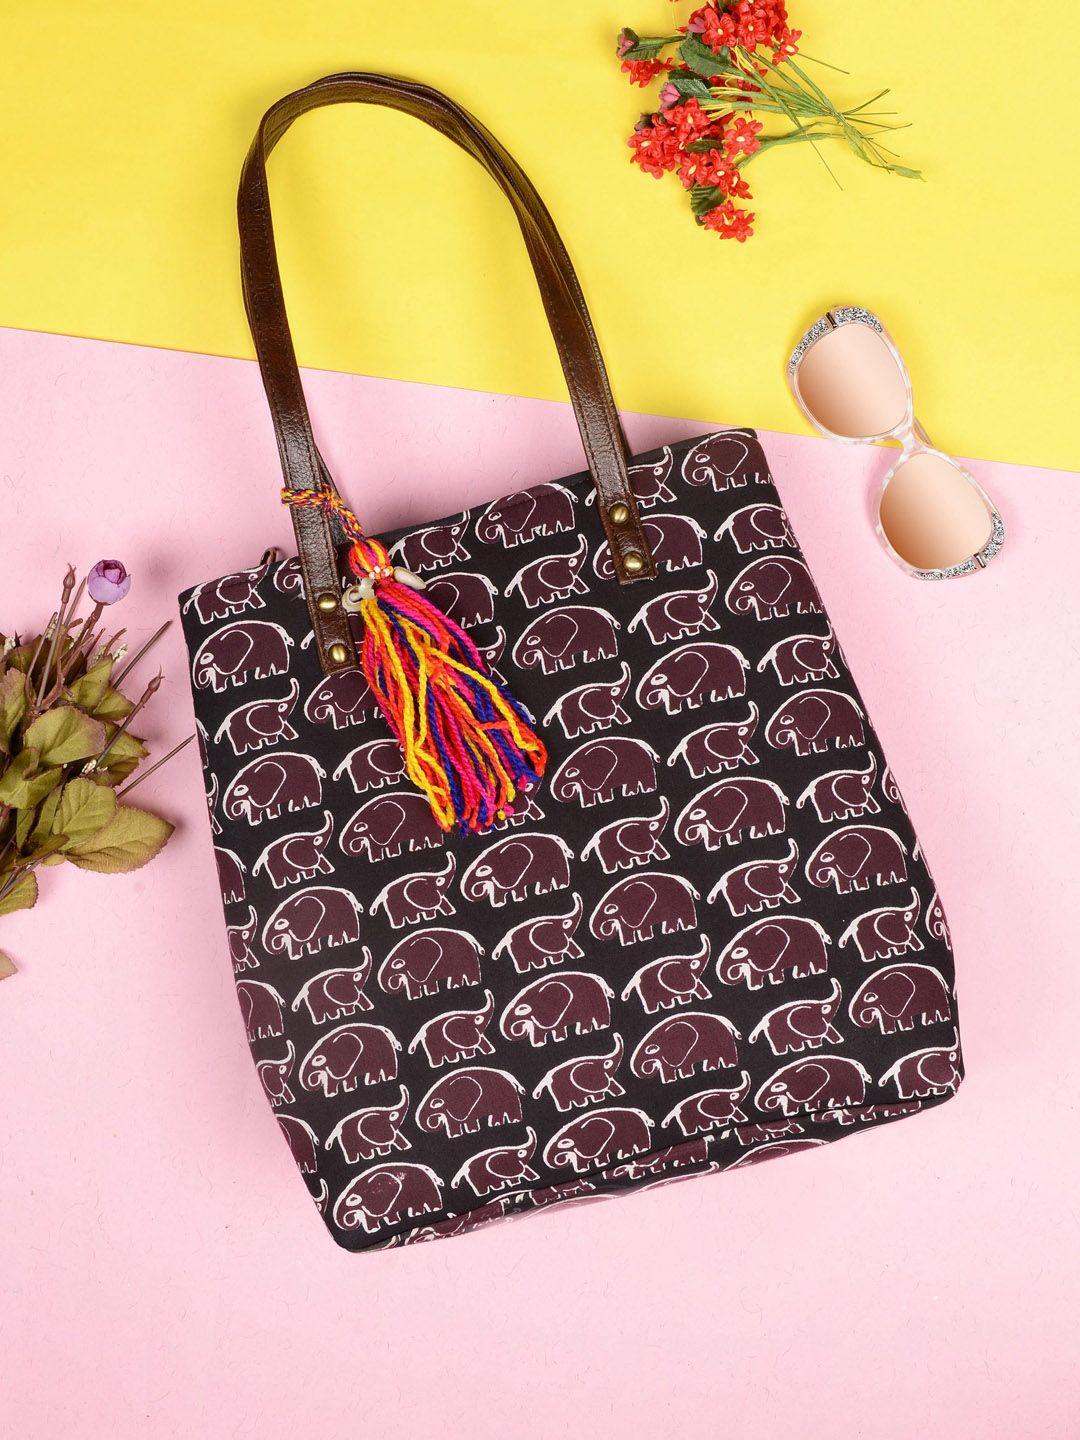 Vivinkaa Black Ethnic Motifs Printed Structured Tote Bag with Tasselled